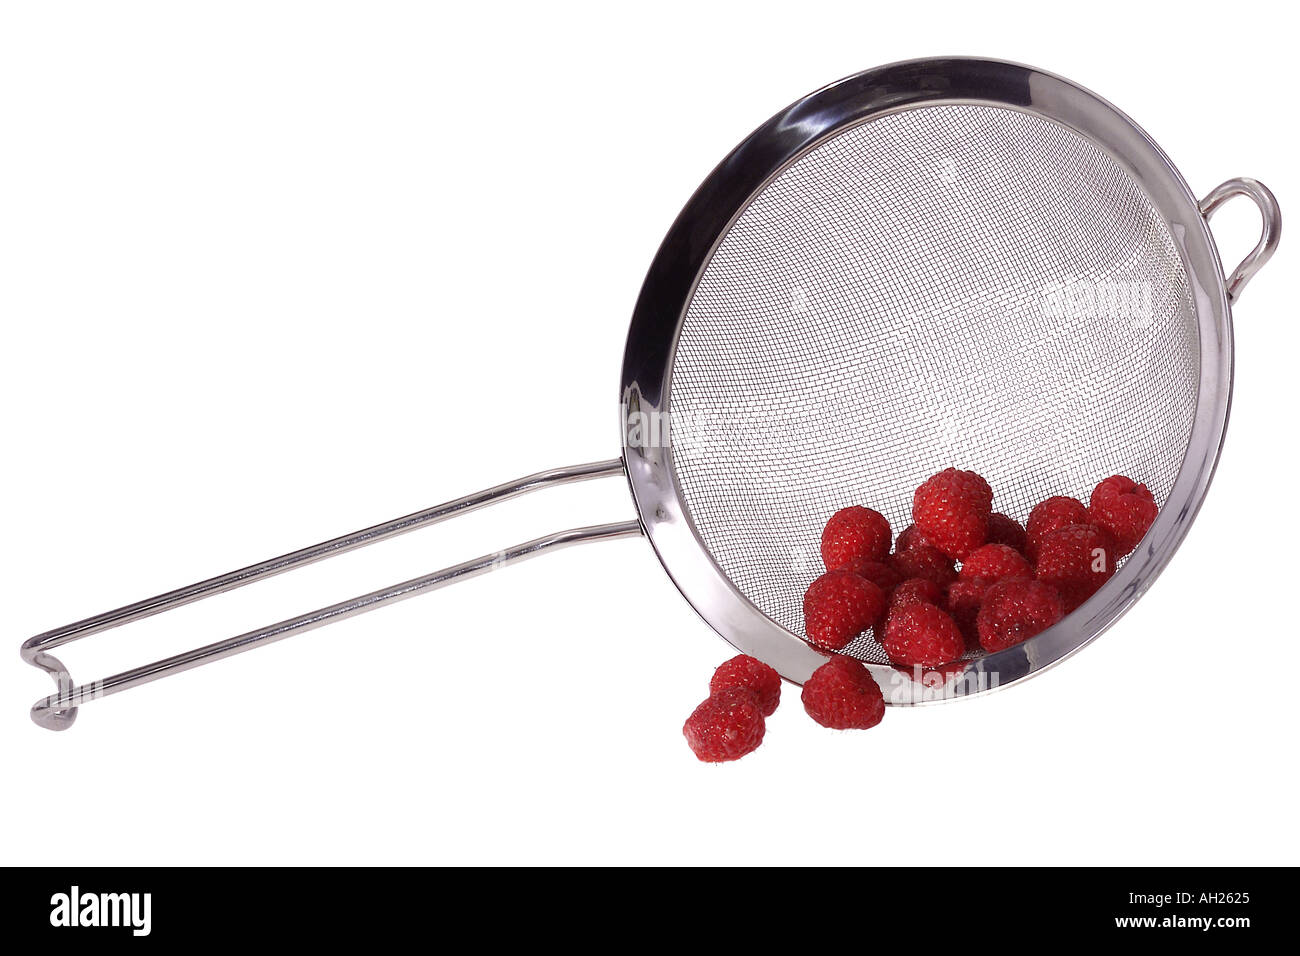 Wire mesh colander with berries silhouetted on white background Stock Photo